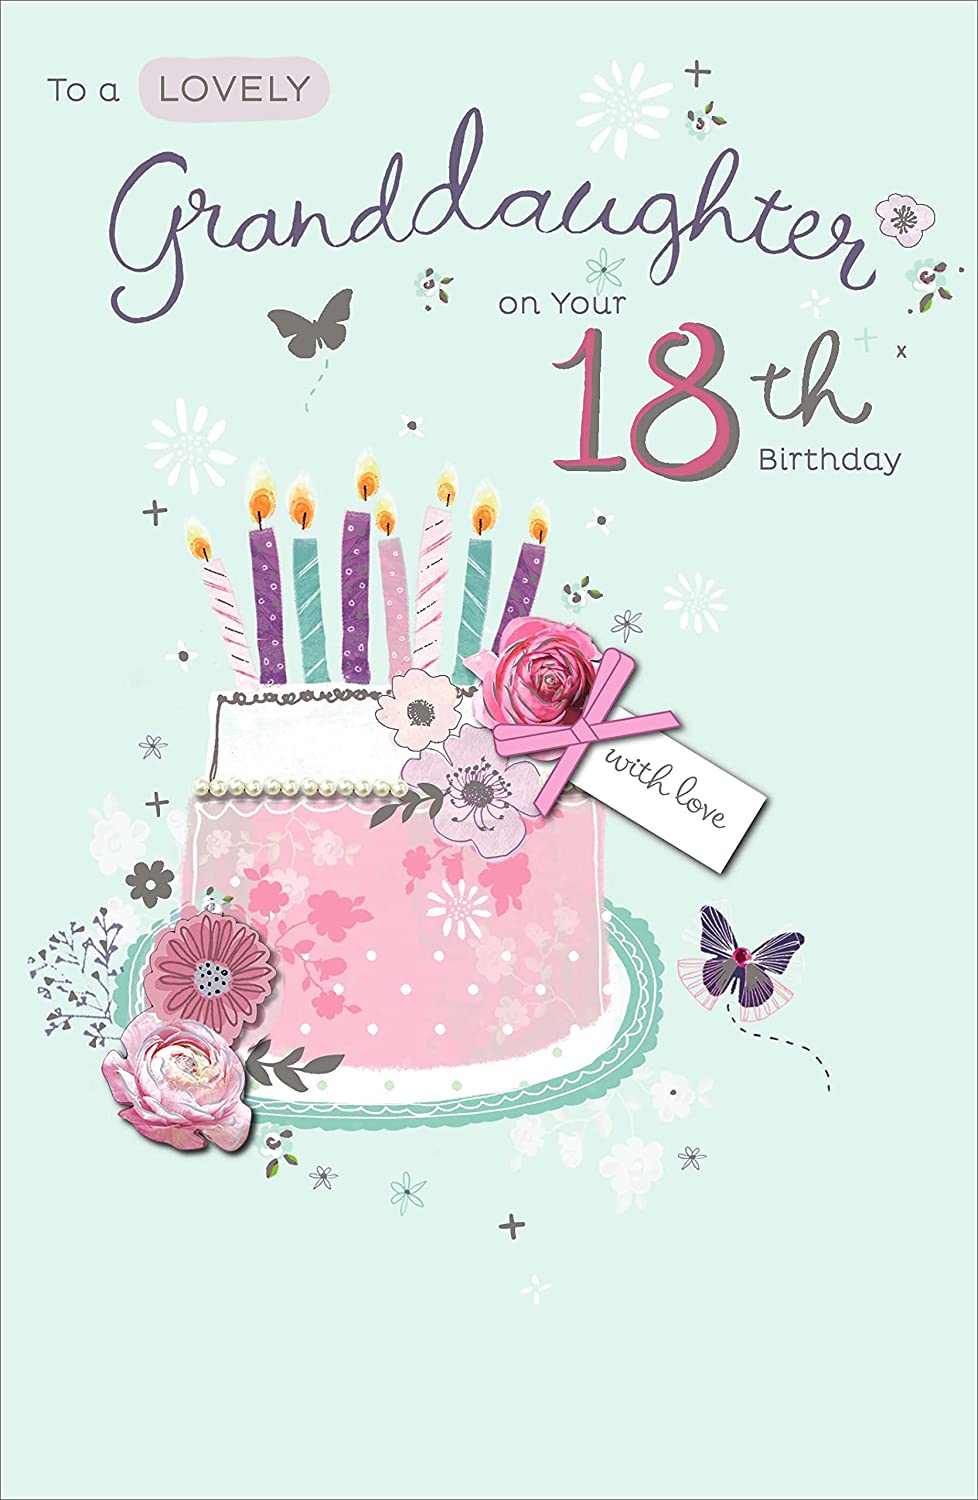 Roses Pearl Diamante Lovely 18th Granddaughter Birthday Card